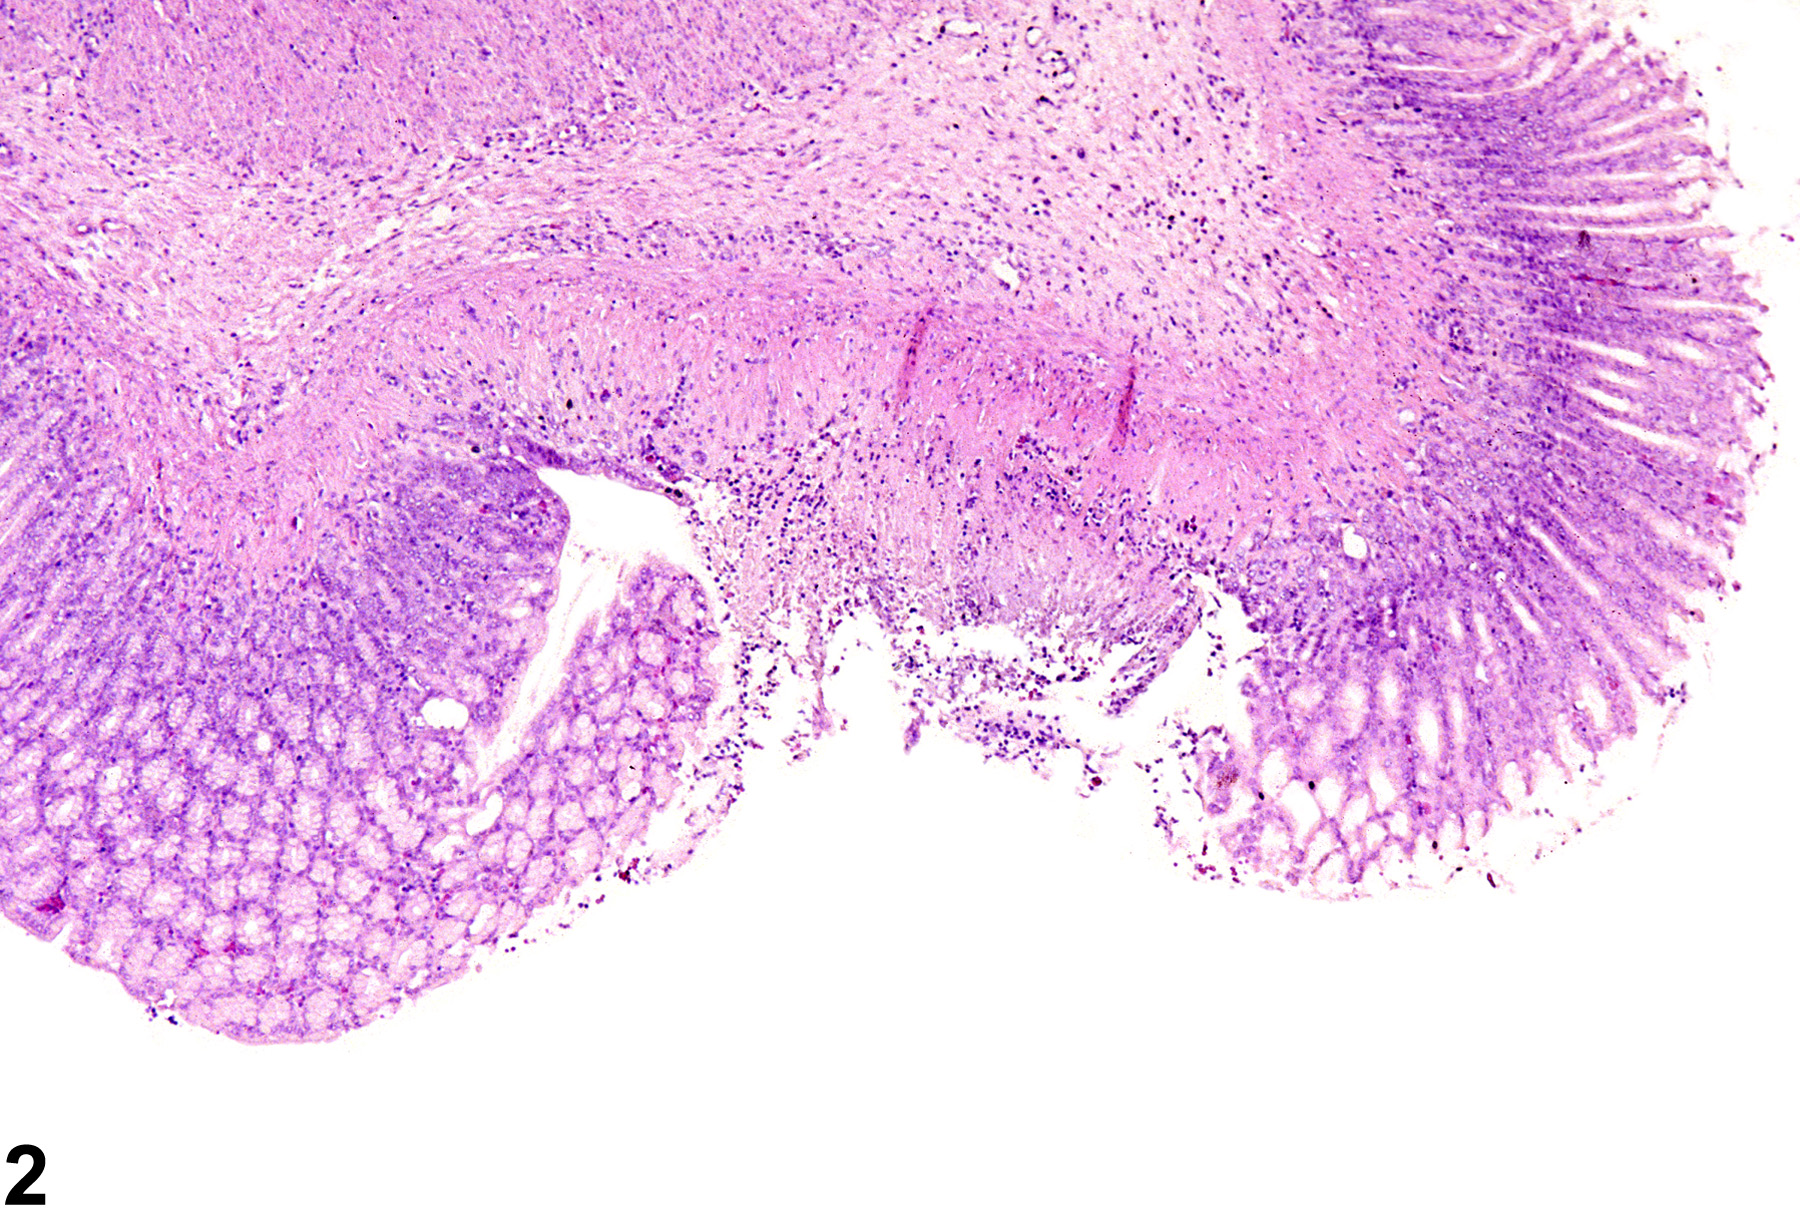 Image of ulcer in the glandular stomach from a male F344/N rat in a chronic study